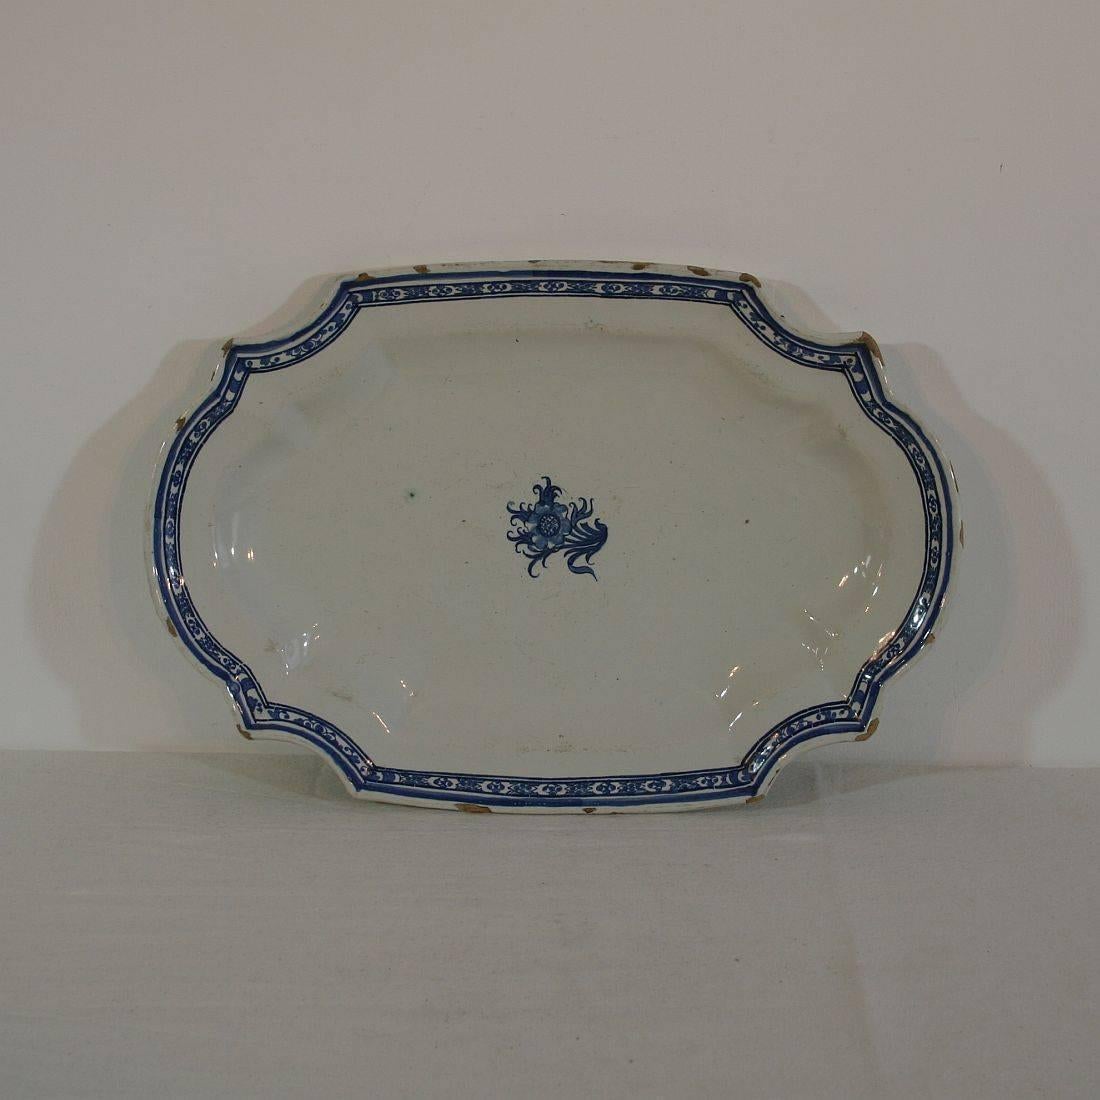 Other Pair of Late 18th Century, French Faience Earthenware Rouen Serving Platters